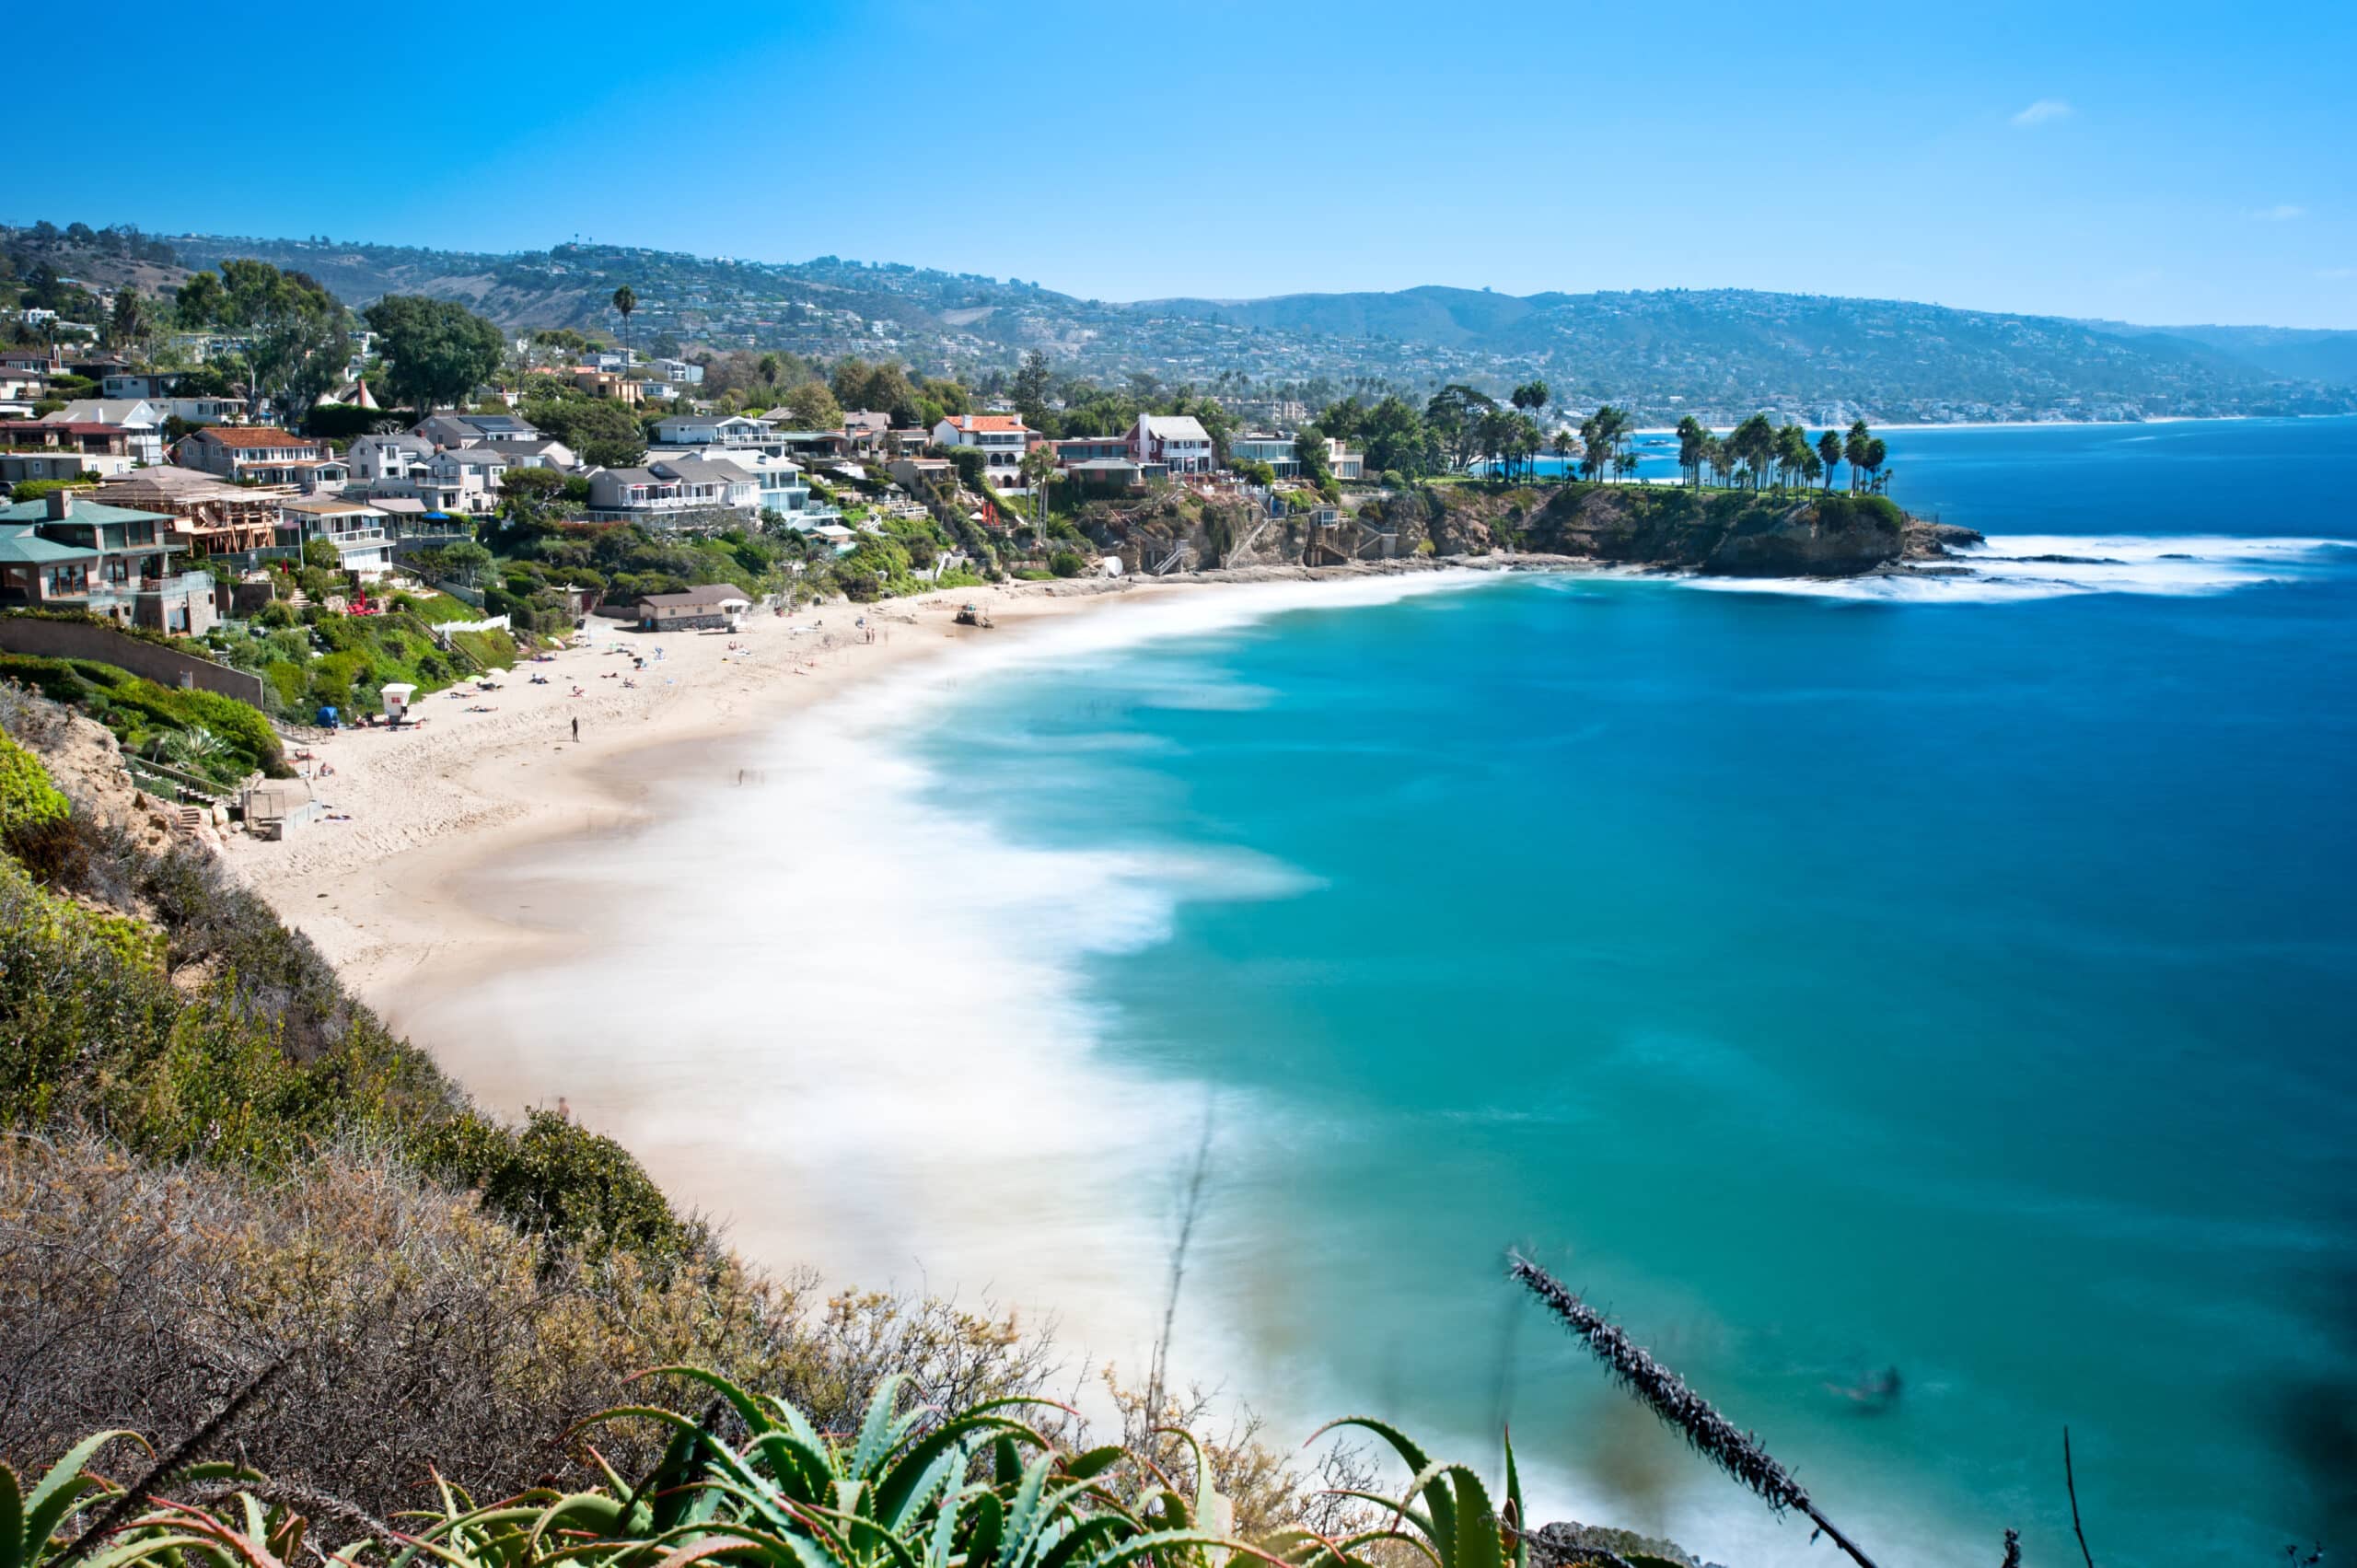 An image of a beautiful cove called Crescent Bay in Laguna Beach, California. Shot with a slow shutter to capture the water motion on a bright sunny day.